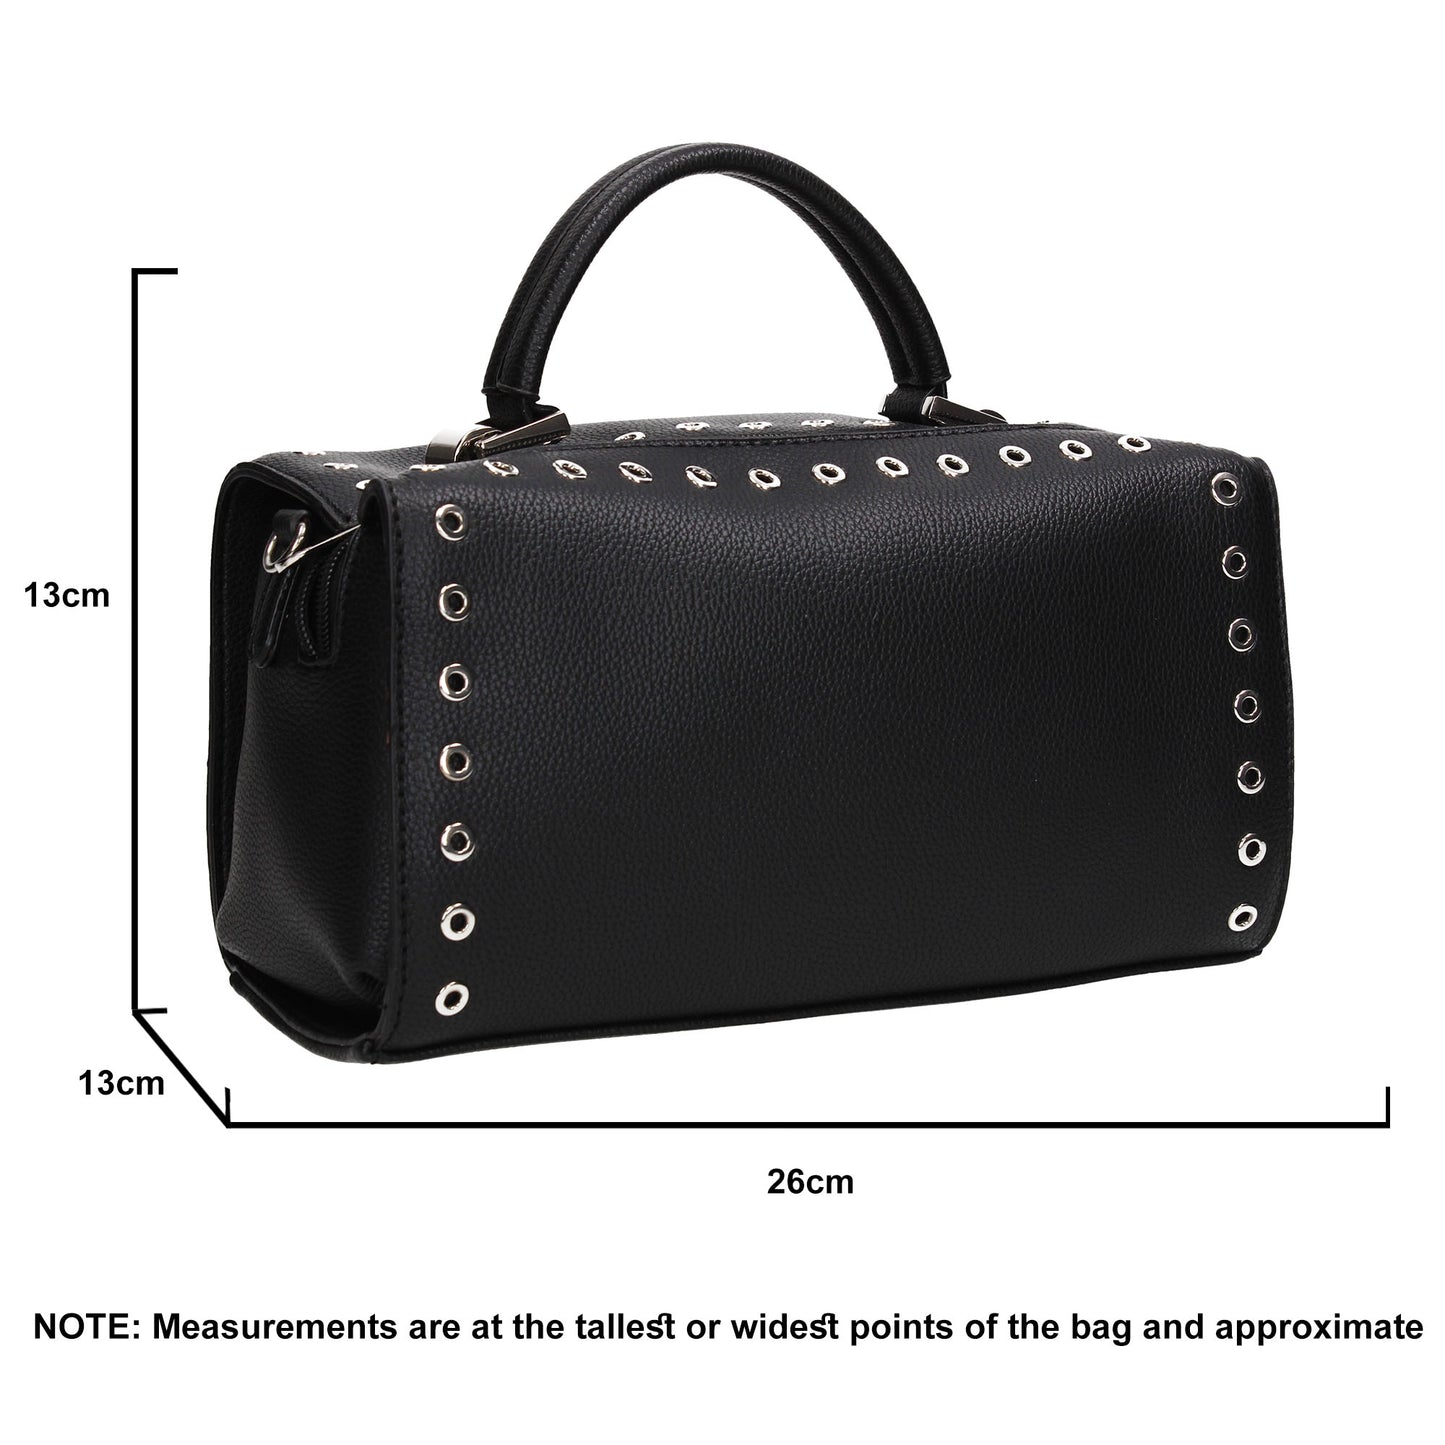 Buy your Anna Handbag Black Today! Buy with confidence from Swankyswans